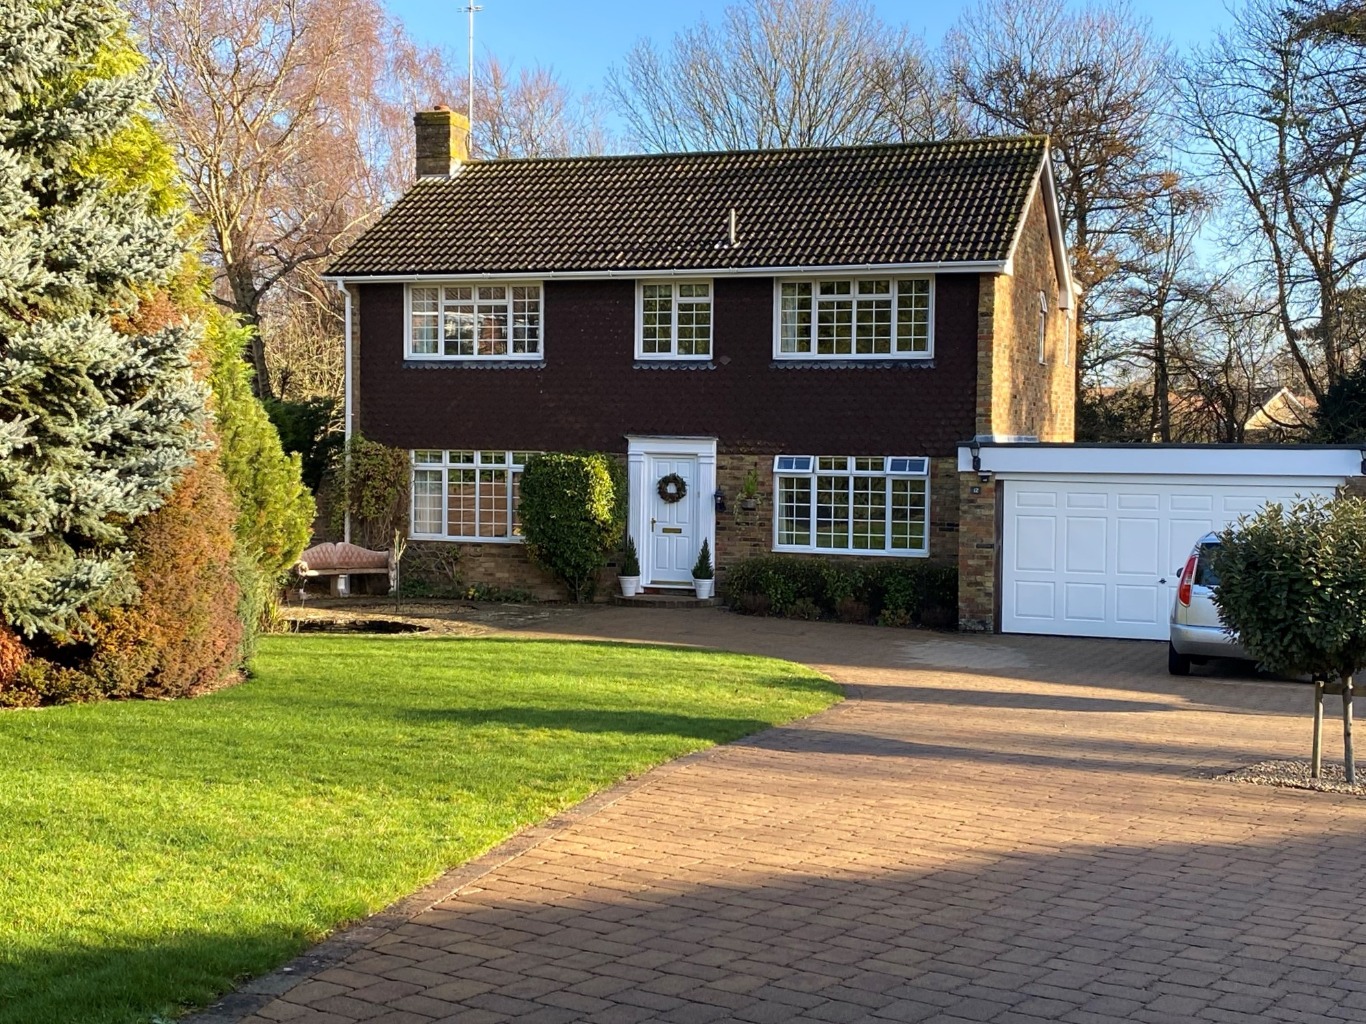 NO ONWARD CHAIN.  Here we have a beautiful detached family home which has a wealth of accommodation including an en-suite to the master bedroom, family bathroom and then downstairs can be found a large reception room, dining room and sitting room.